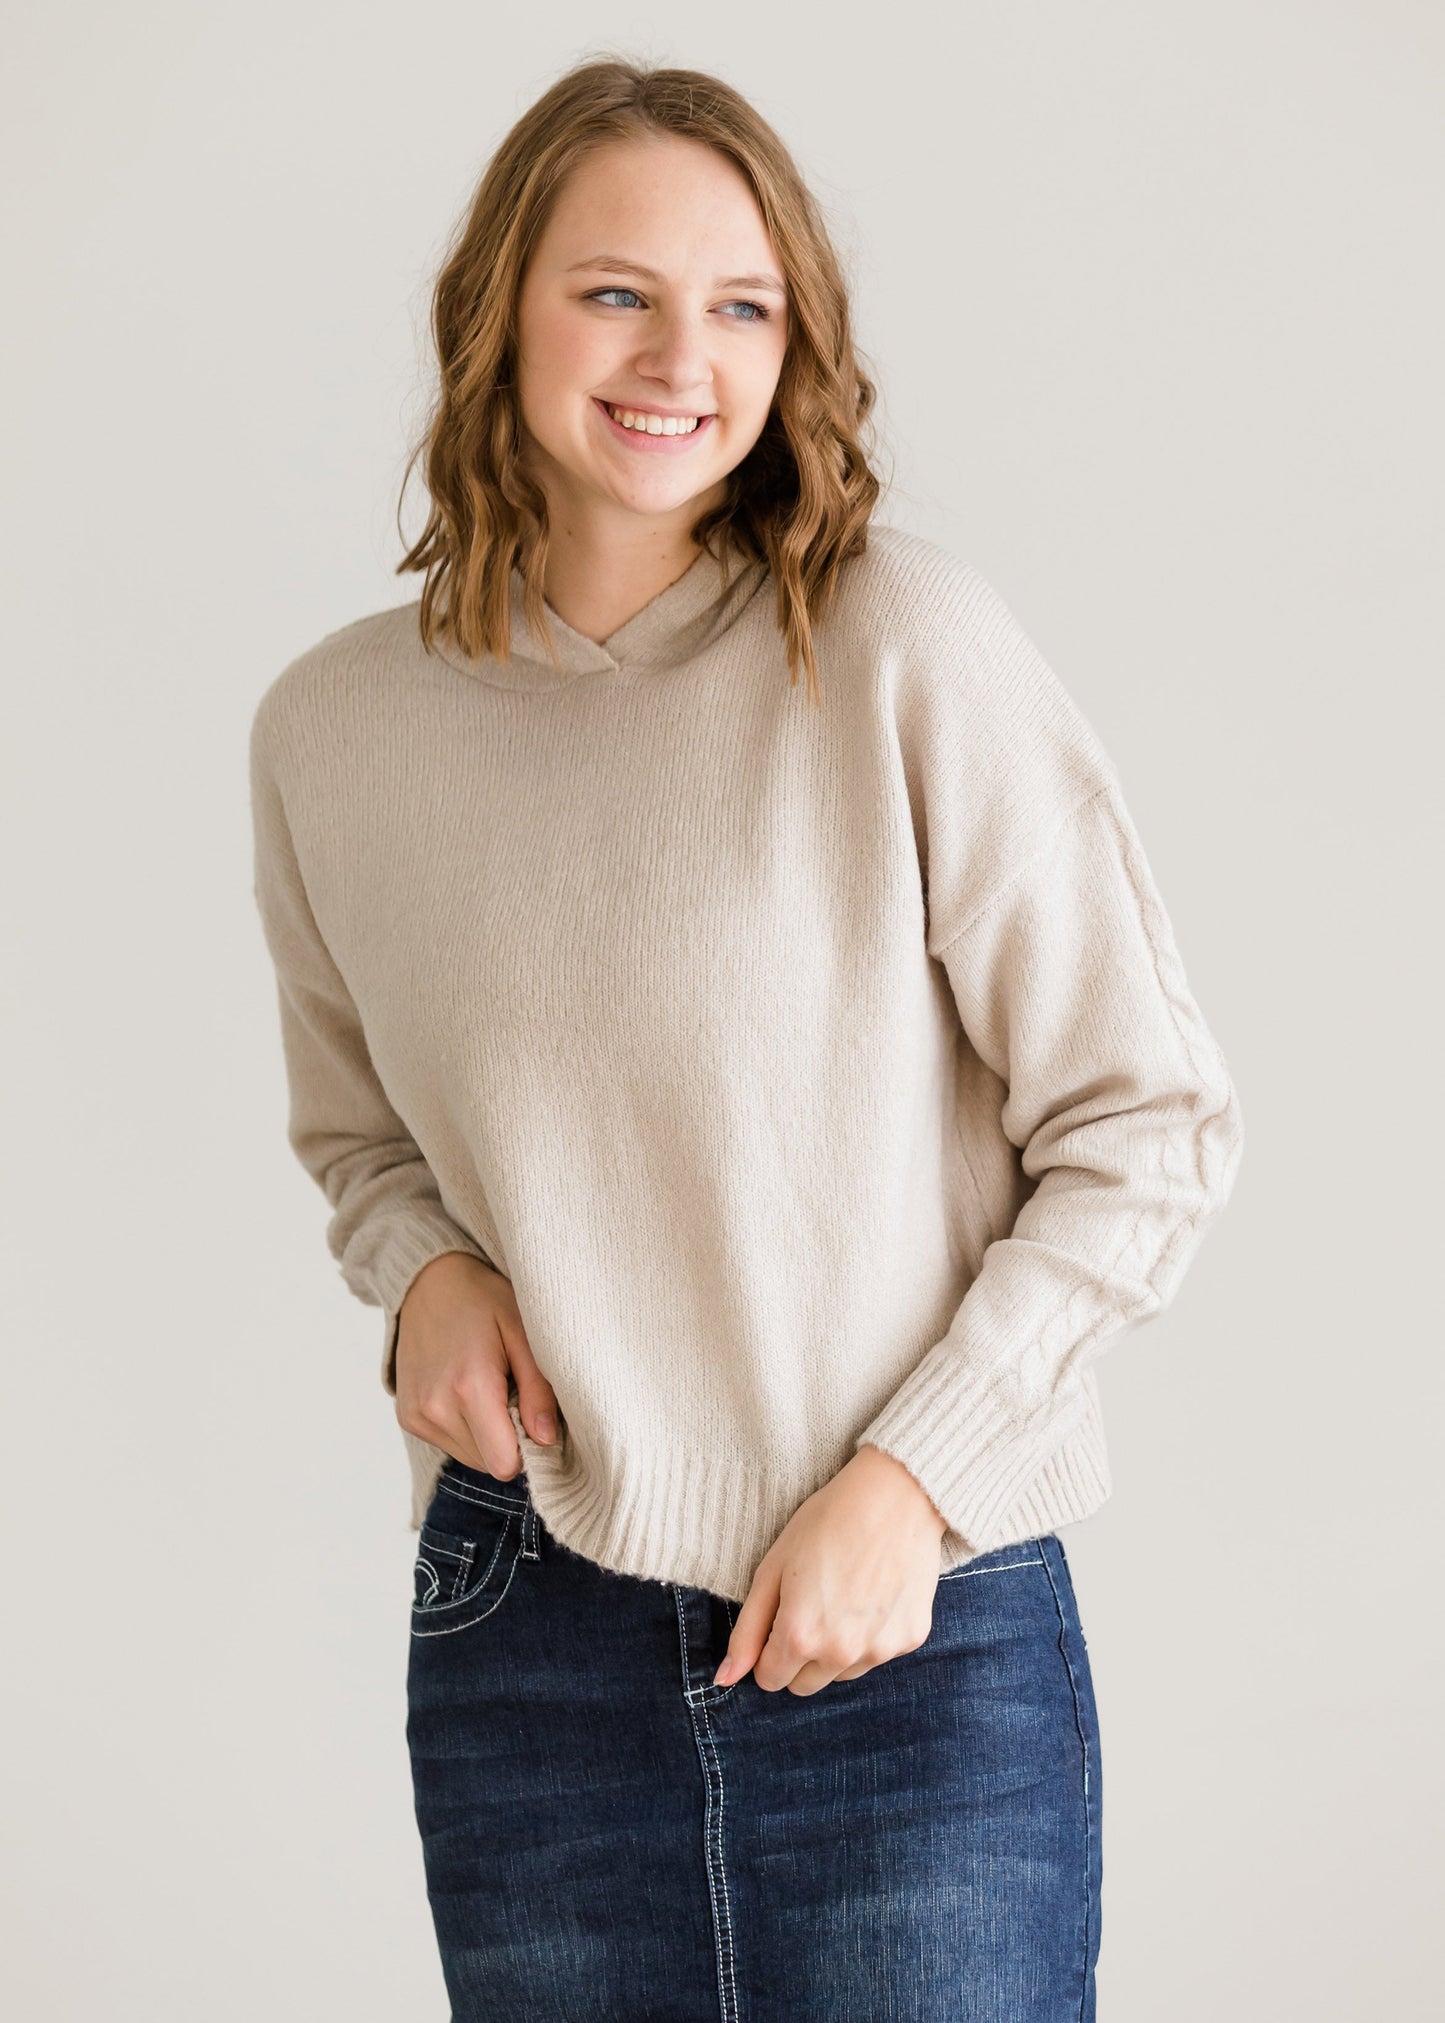 Cable Sleeve Hooded Sweater - FINAL SALE Tops